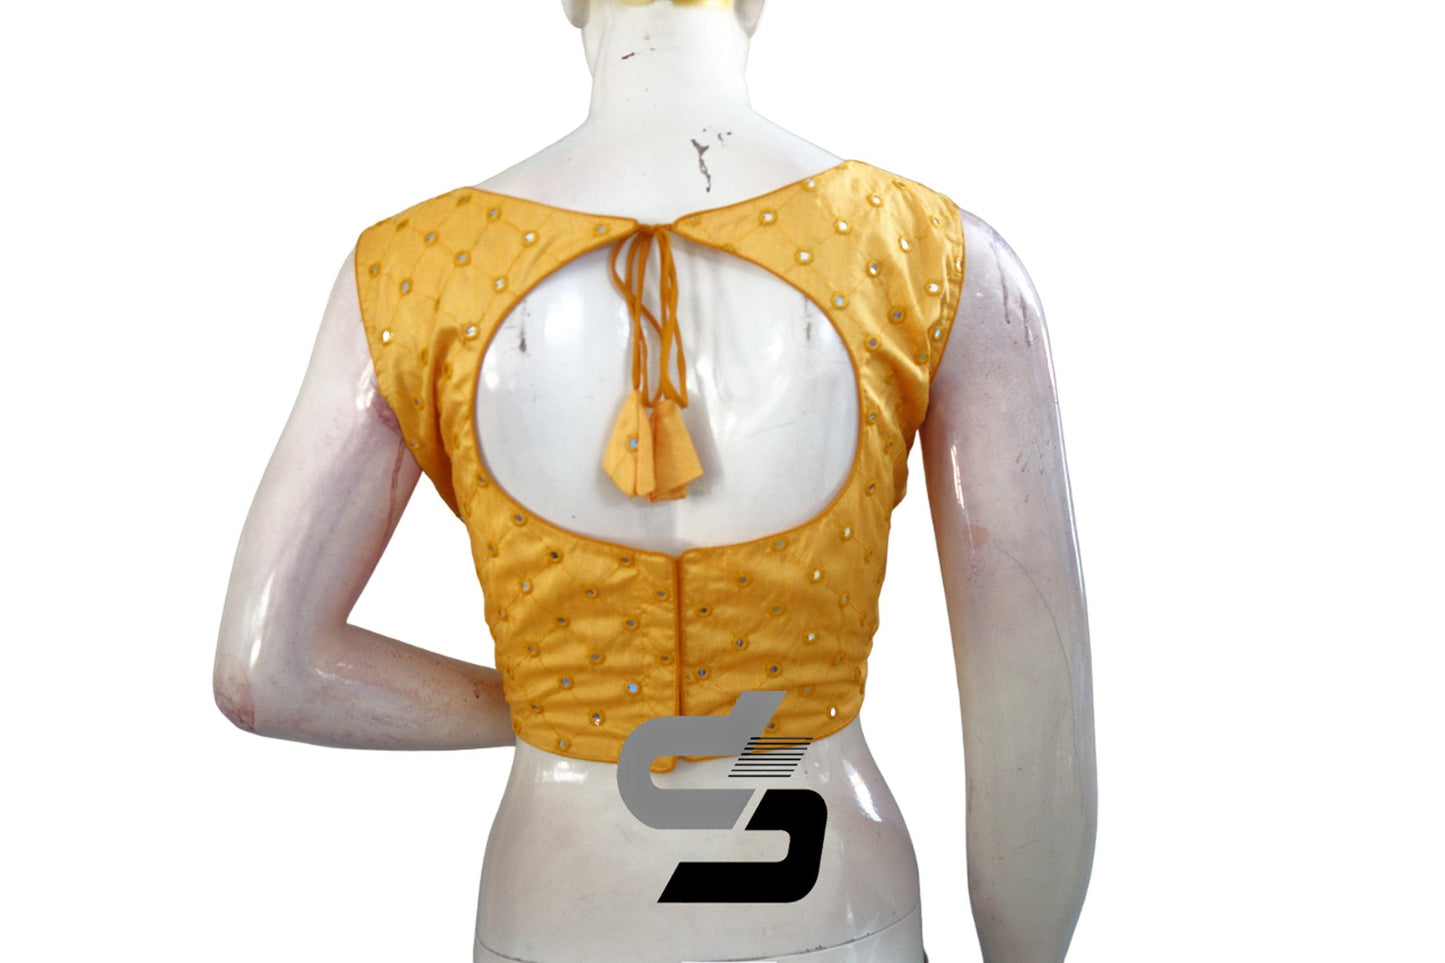 Mustard Yellow Sleeveless Semi Silk Blouse with Foil Mirror Accents, Make a Statement - D3blouses